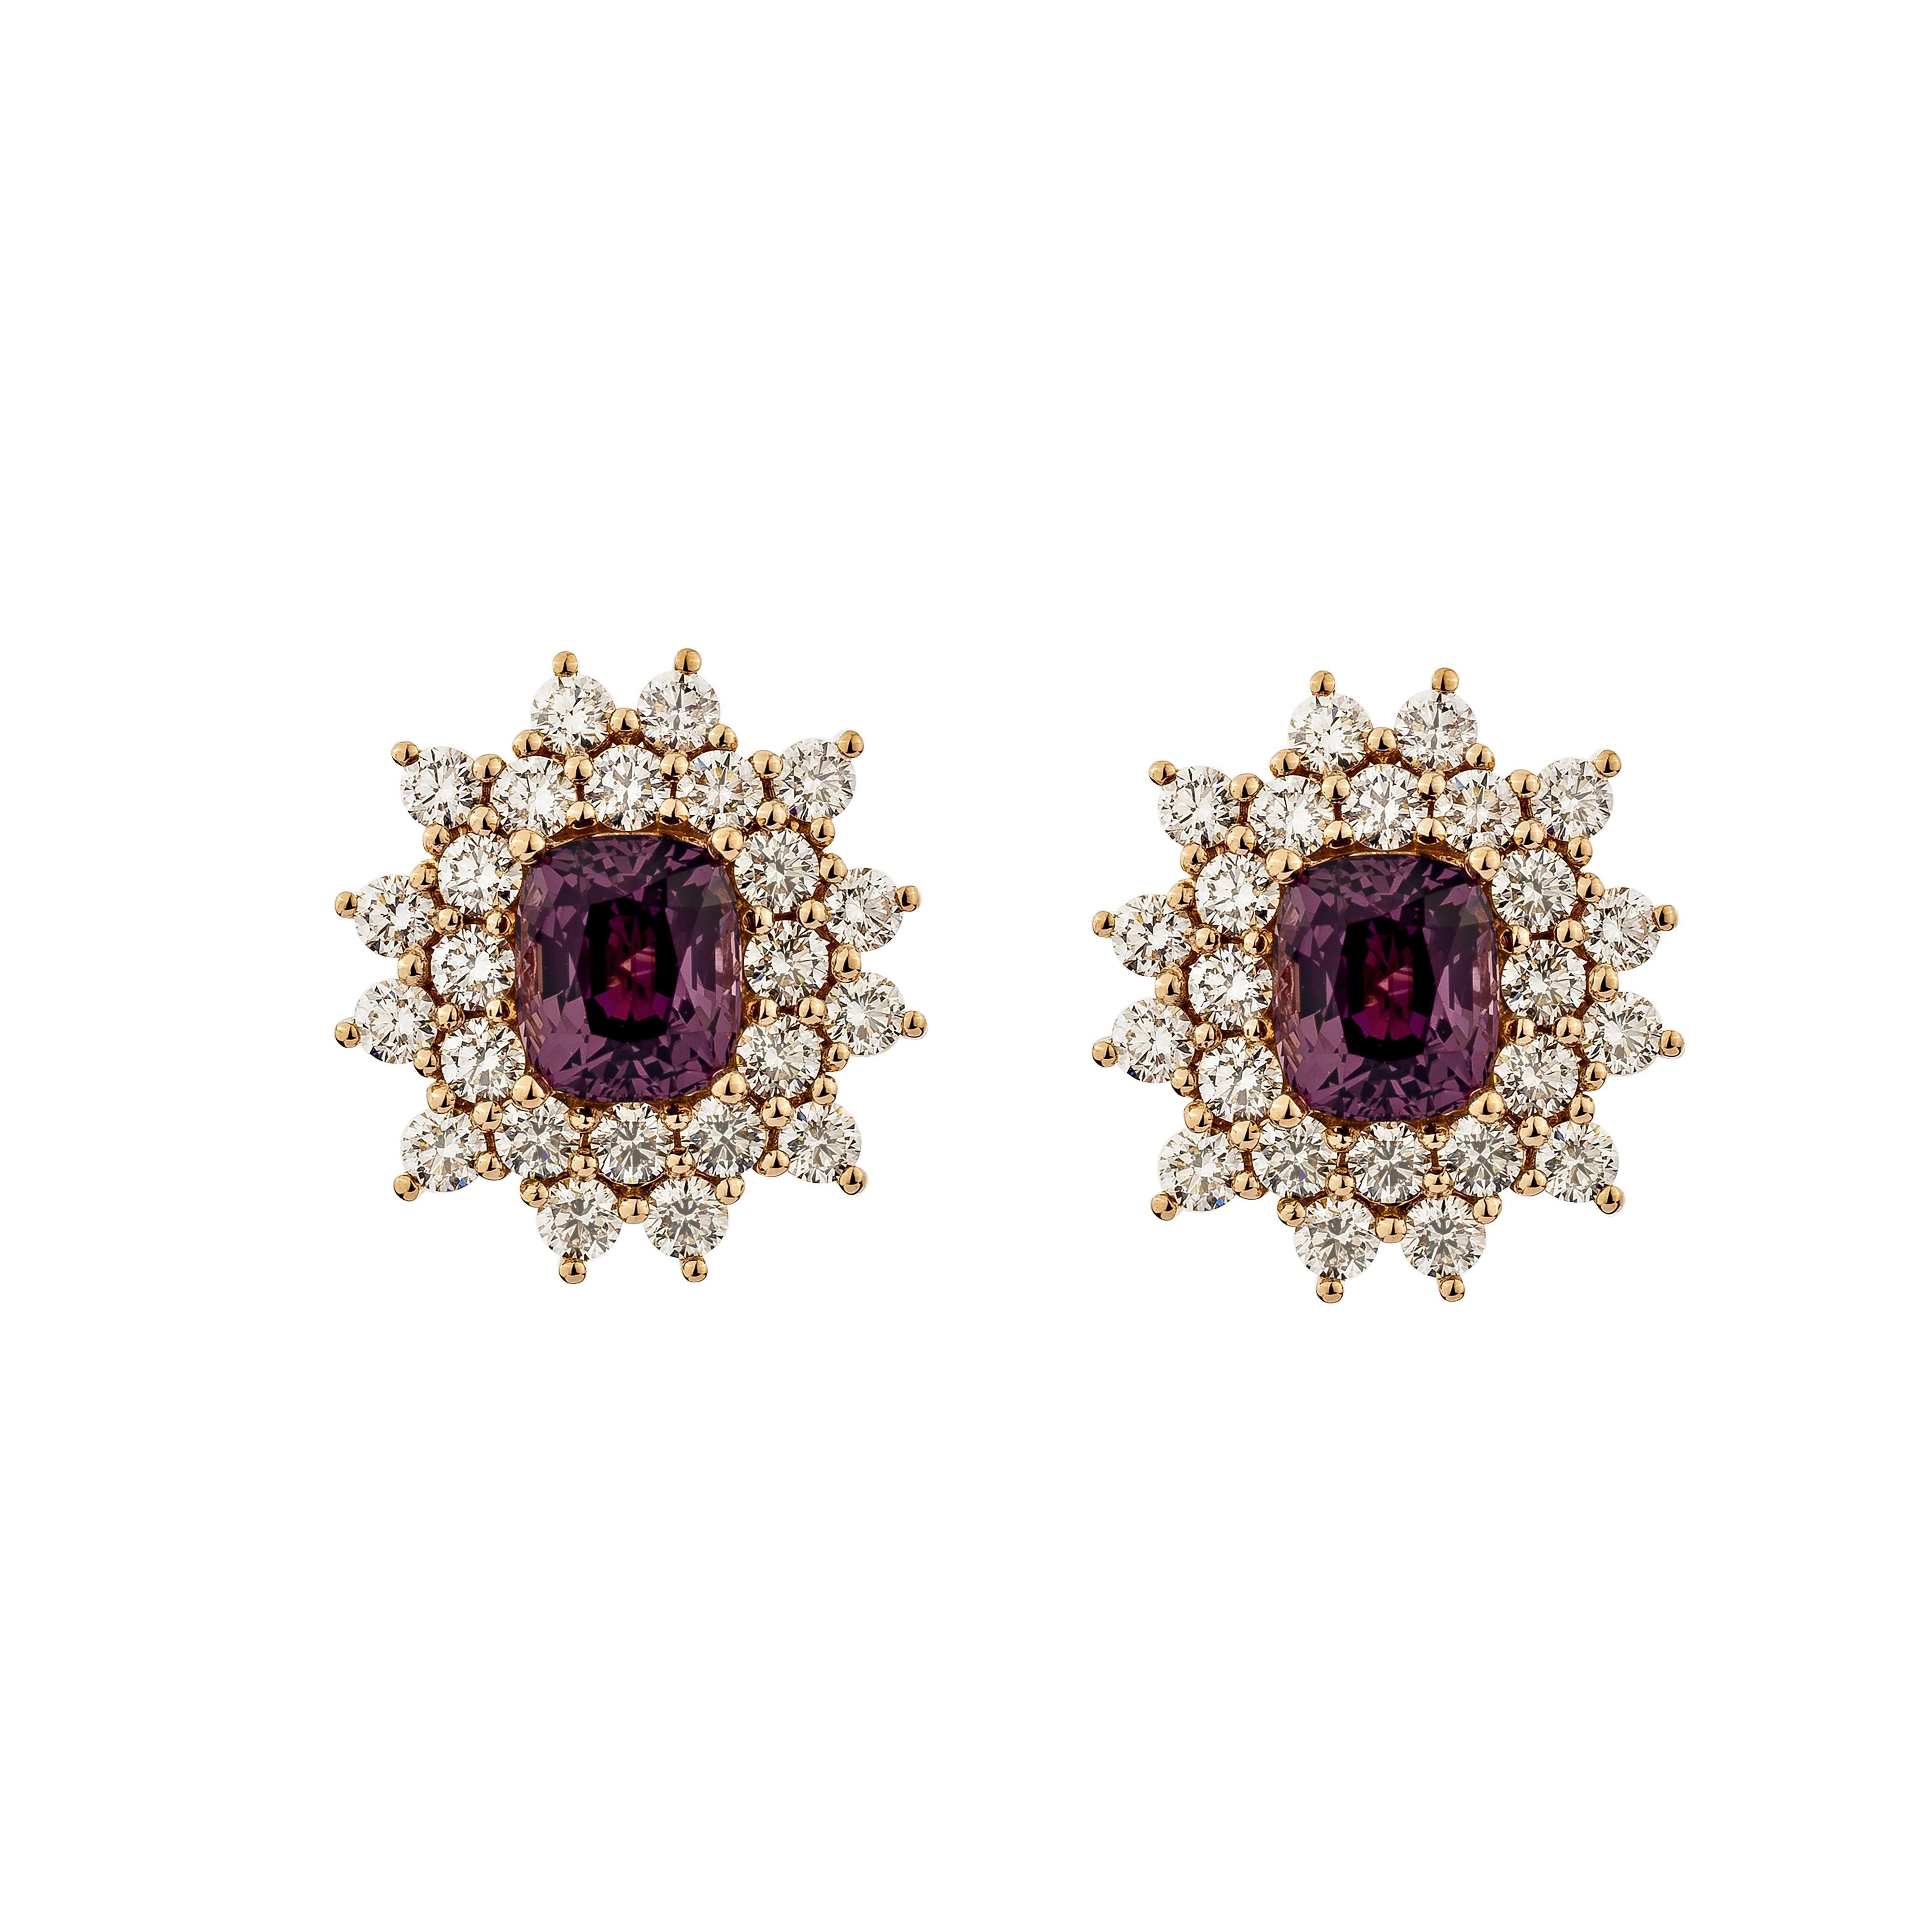 Contemporary 3.82 carat Spinel stud Earrings in 18Karat Rose Gold with White Diamond. For Sale